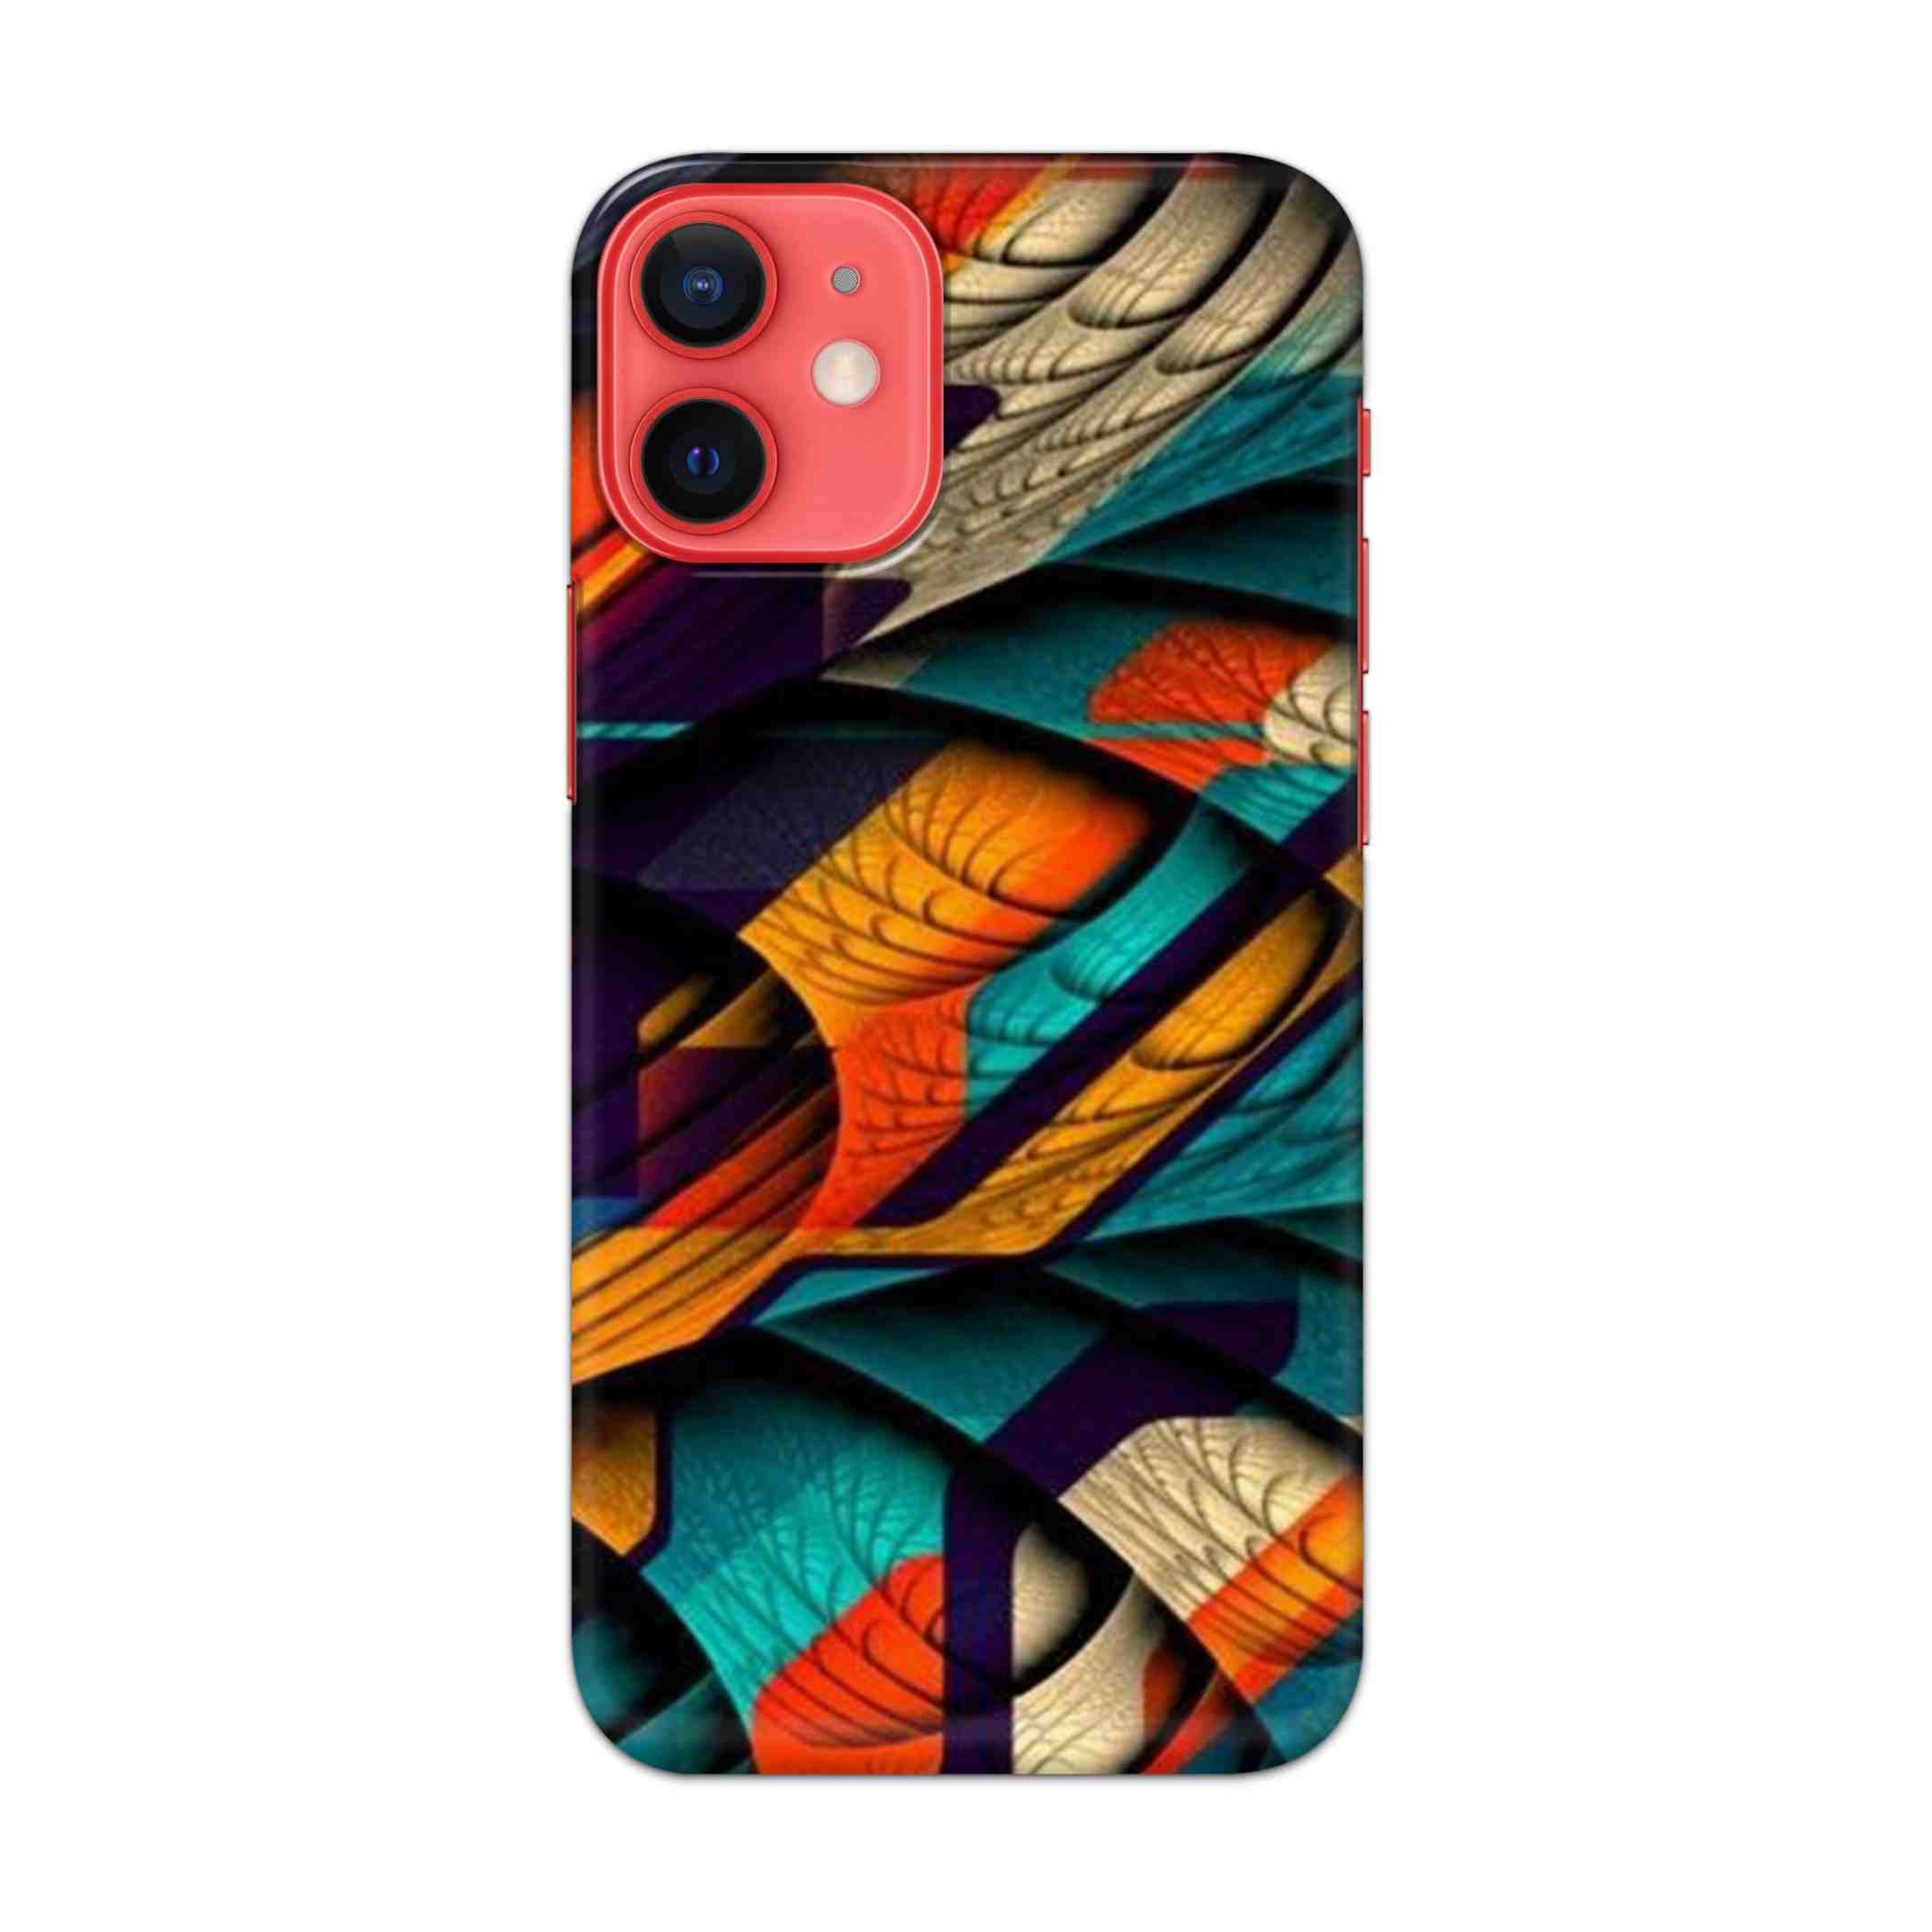 Buy Color Abstract Hard Back Mobile Phone Case/Cover For Apple iPhone 12 mini Online